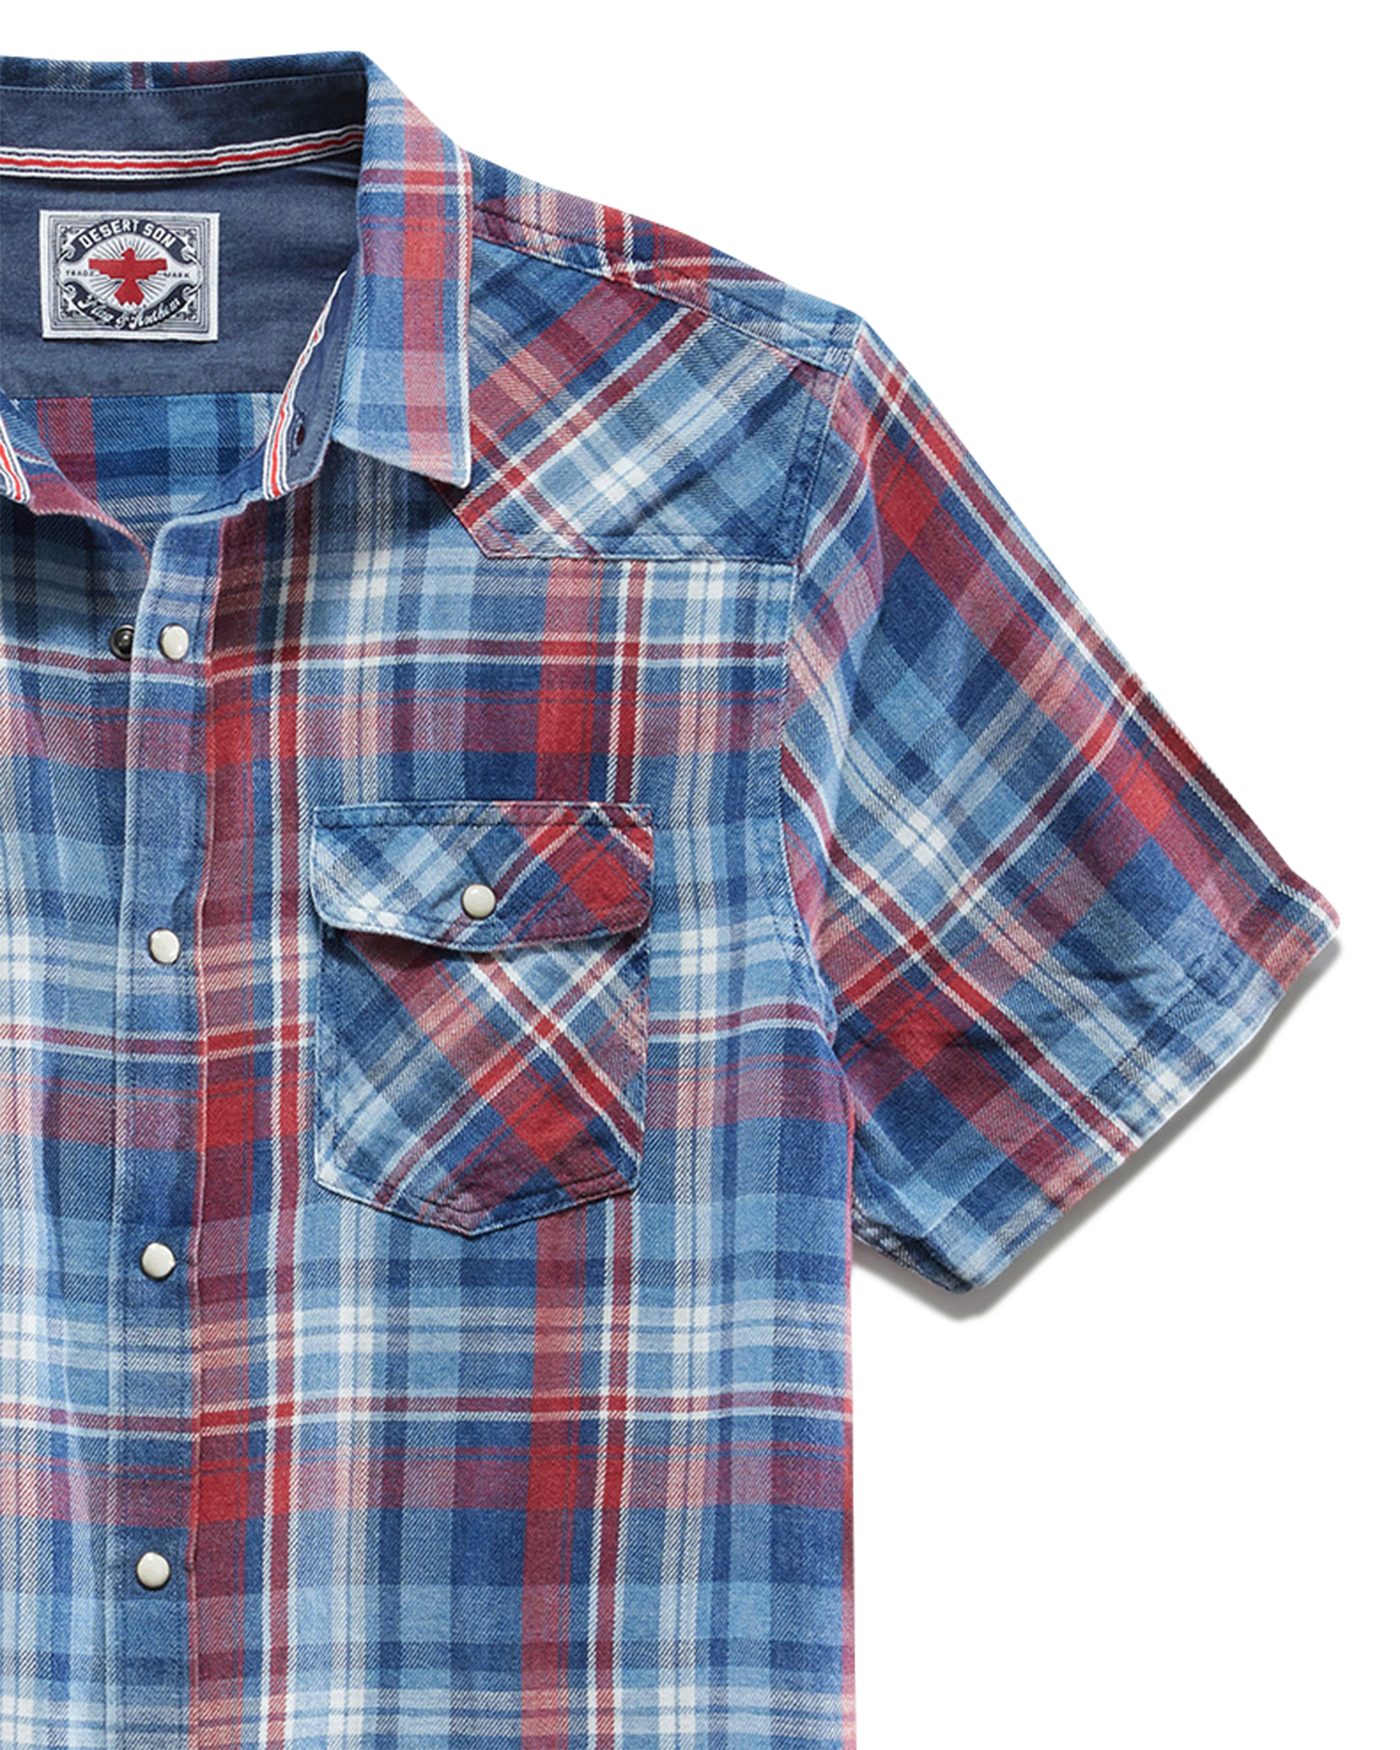 WINCHESTER VINTAGE WASHED WESTERN SS SHIRT